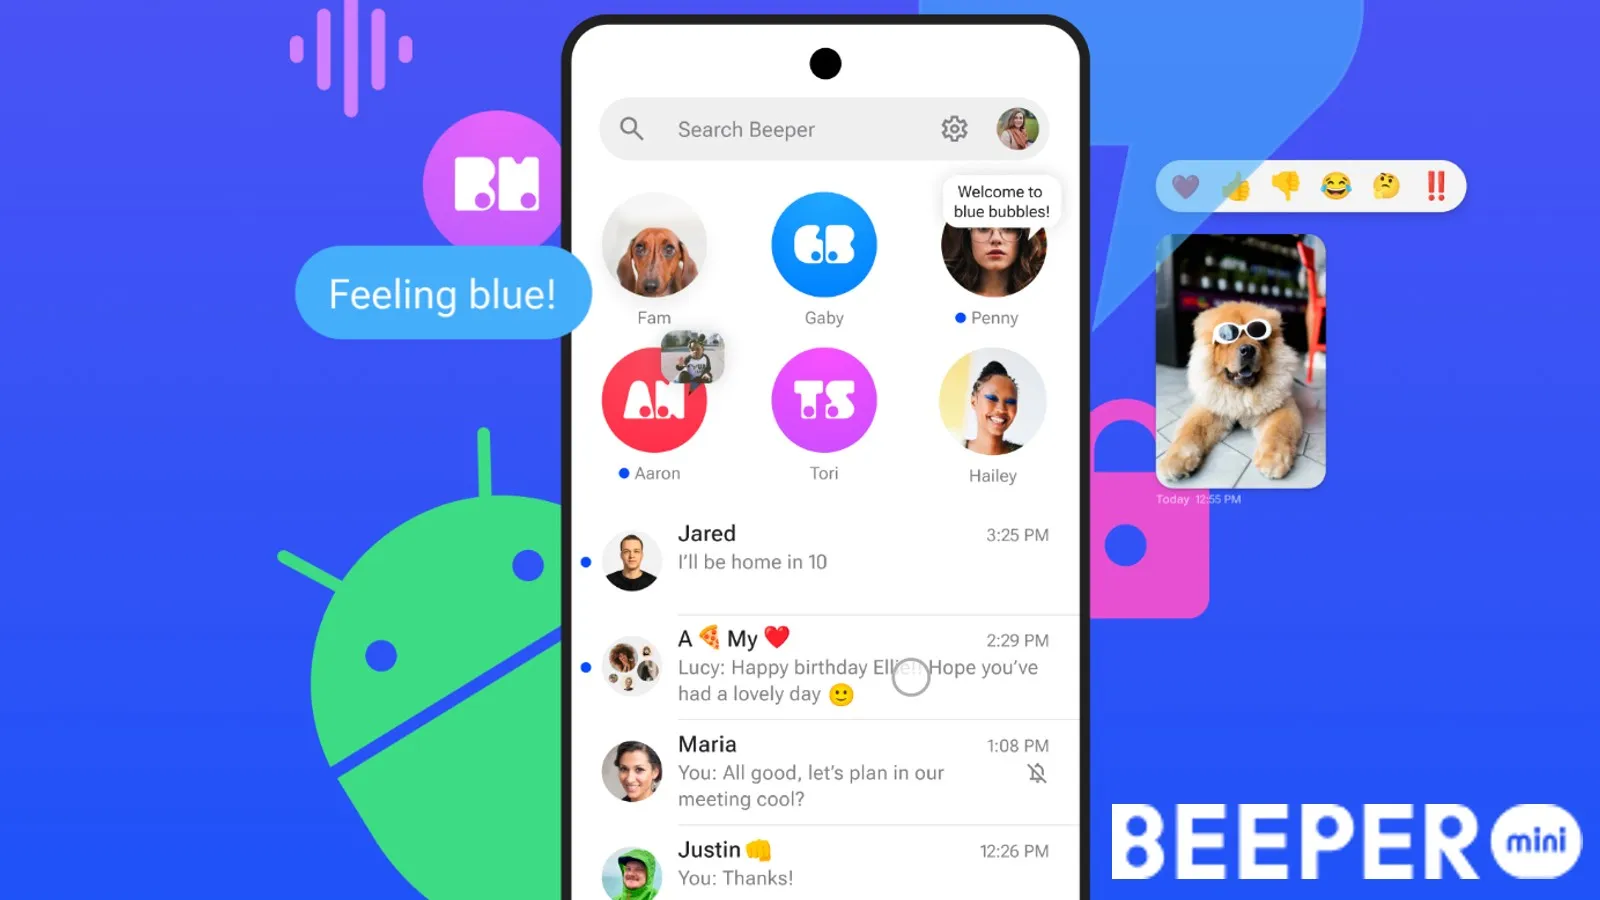 Beeper mini apple android messages iMessage 